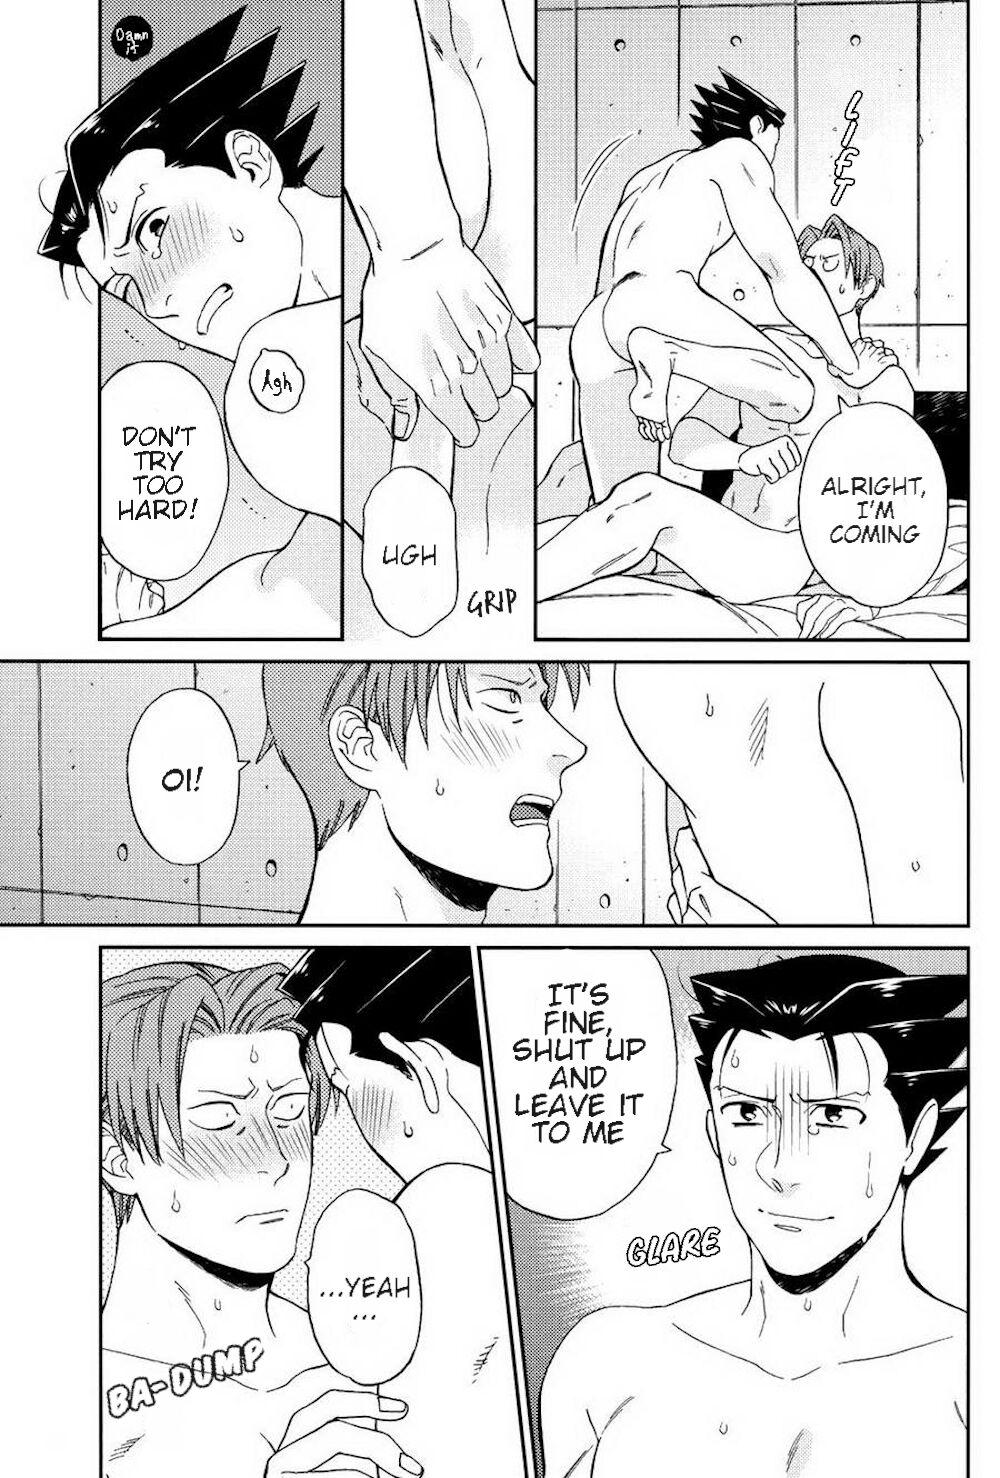 Shower Kid who can do it if he tries, kid who can't - Ace attorney | gyakuten saiban Free Blow Job Porn - Page 10